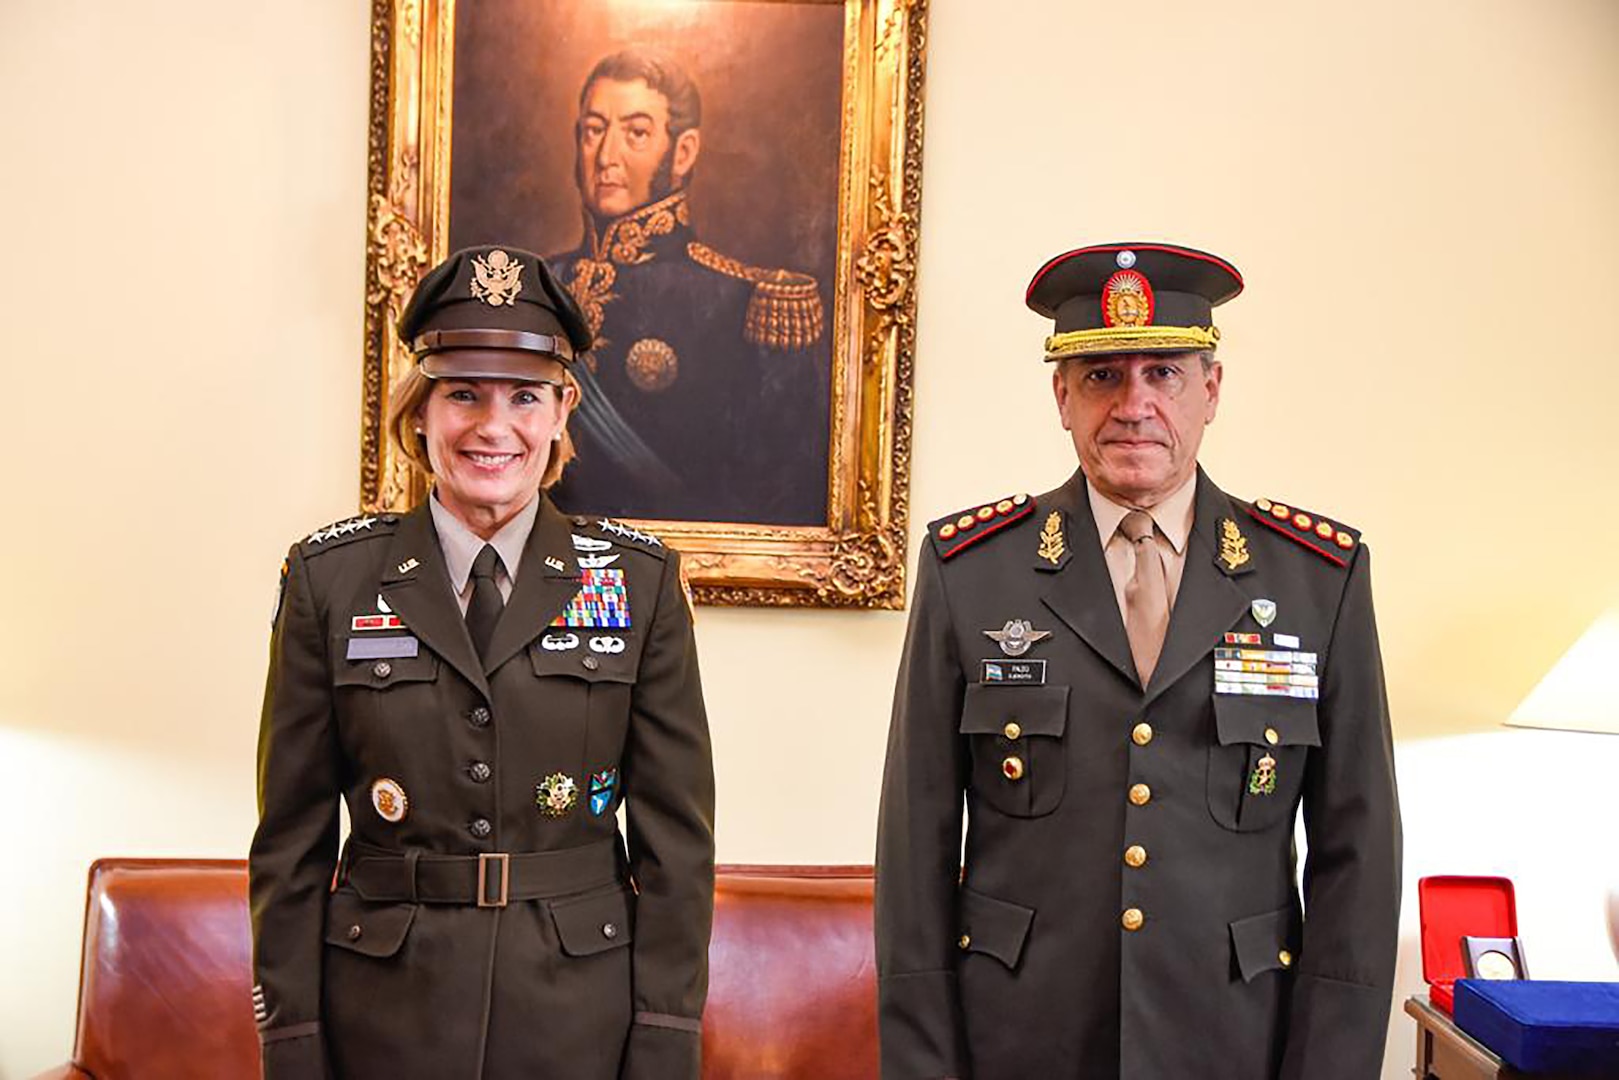 e commander of U.S. Southern Command, U.S. Army Gen. Laura Richardson, and Argentine Armed Forces Joint Command Chief Lt. Gen. Juan Martín Paleo, meet to discuss security cooperation.